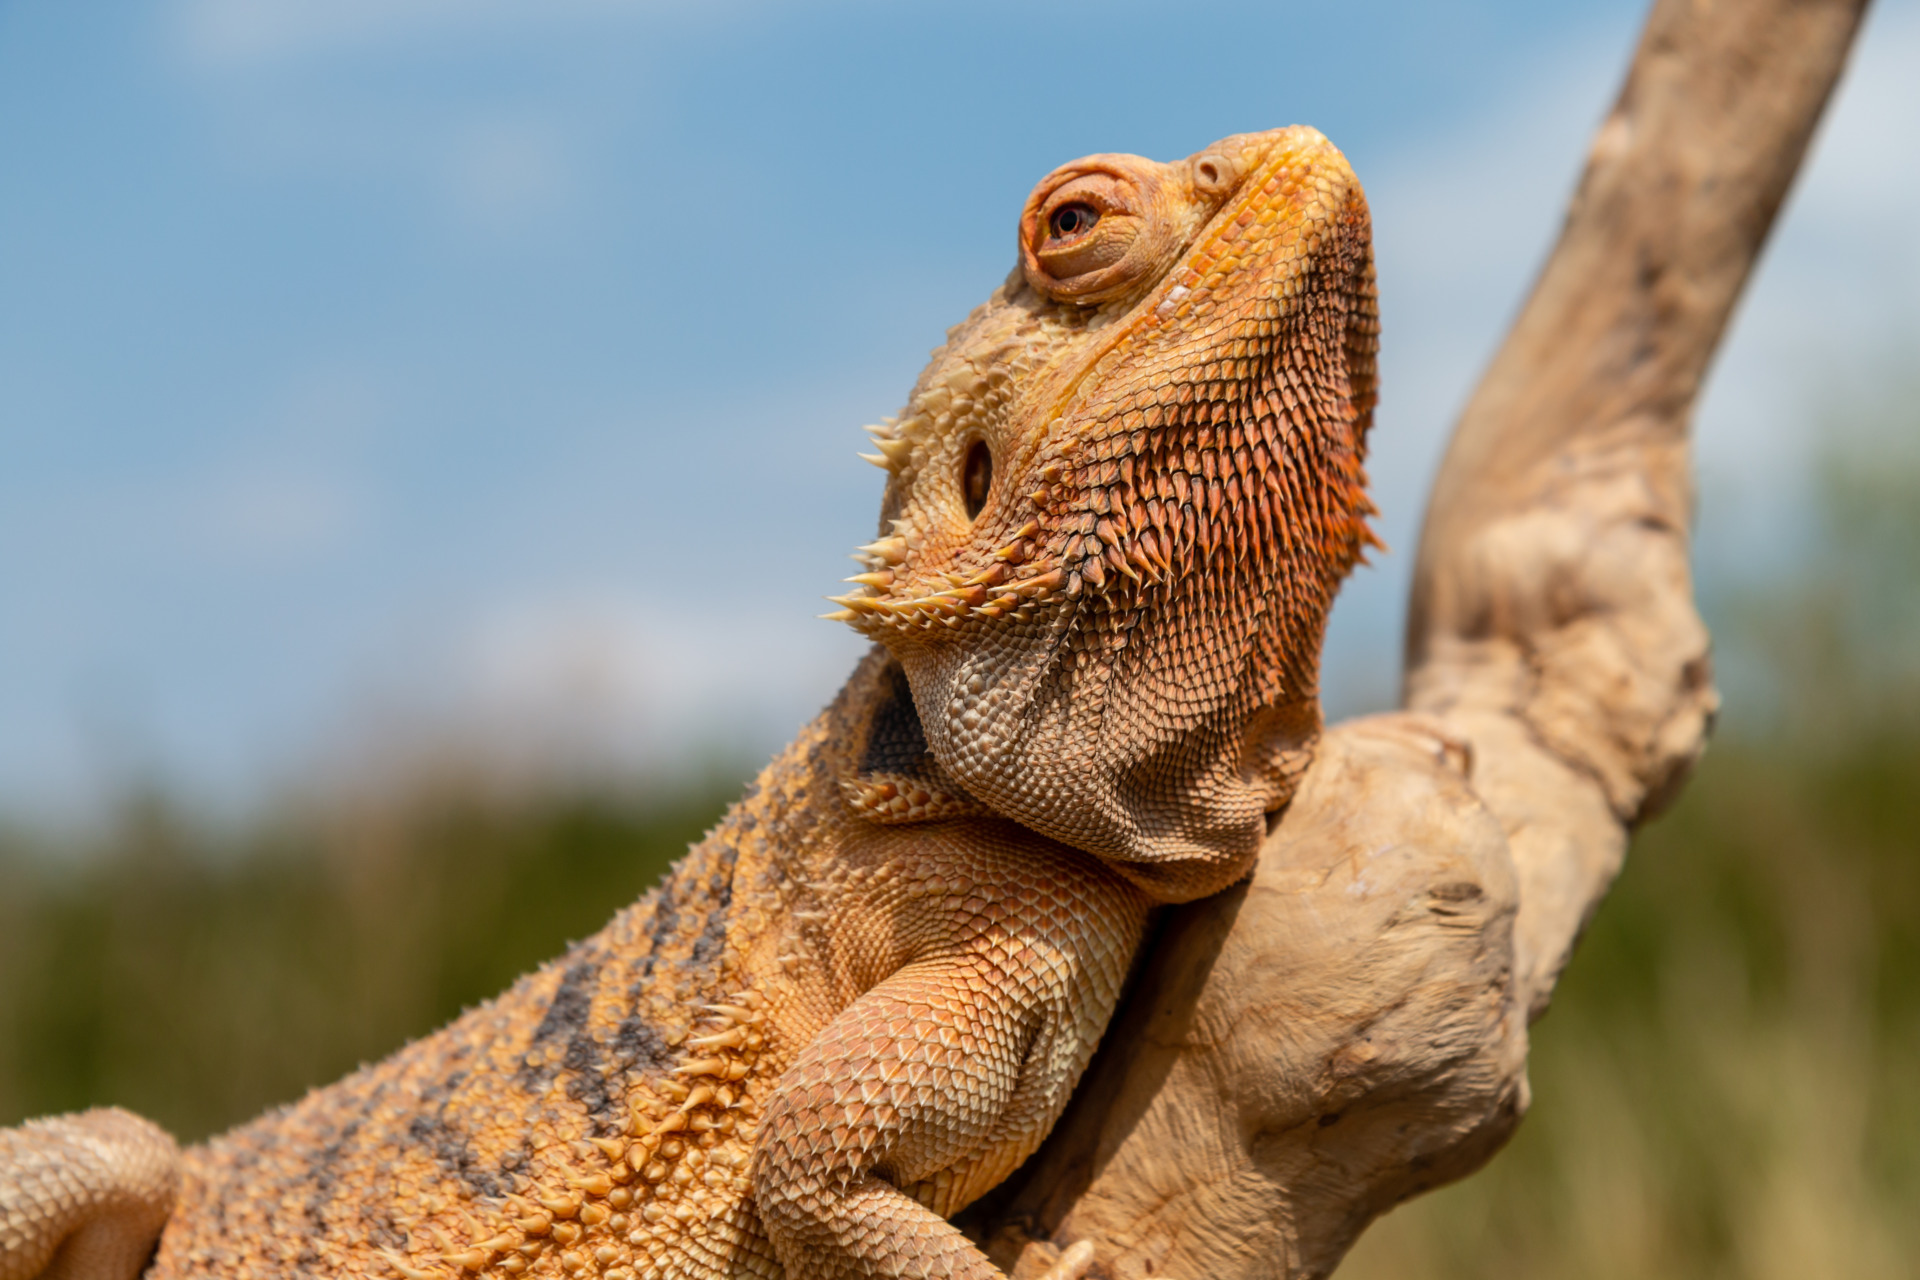 A relaxed Bearded Dragon lizard basking in the sunshine on an outdoor